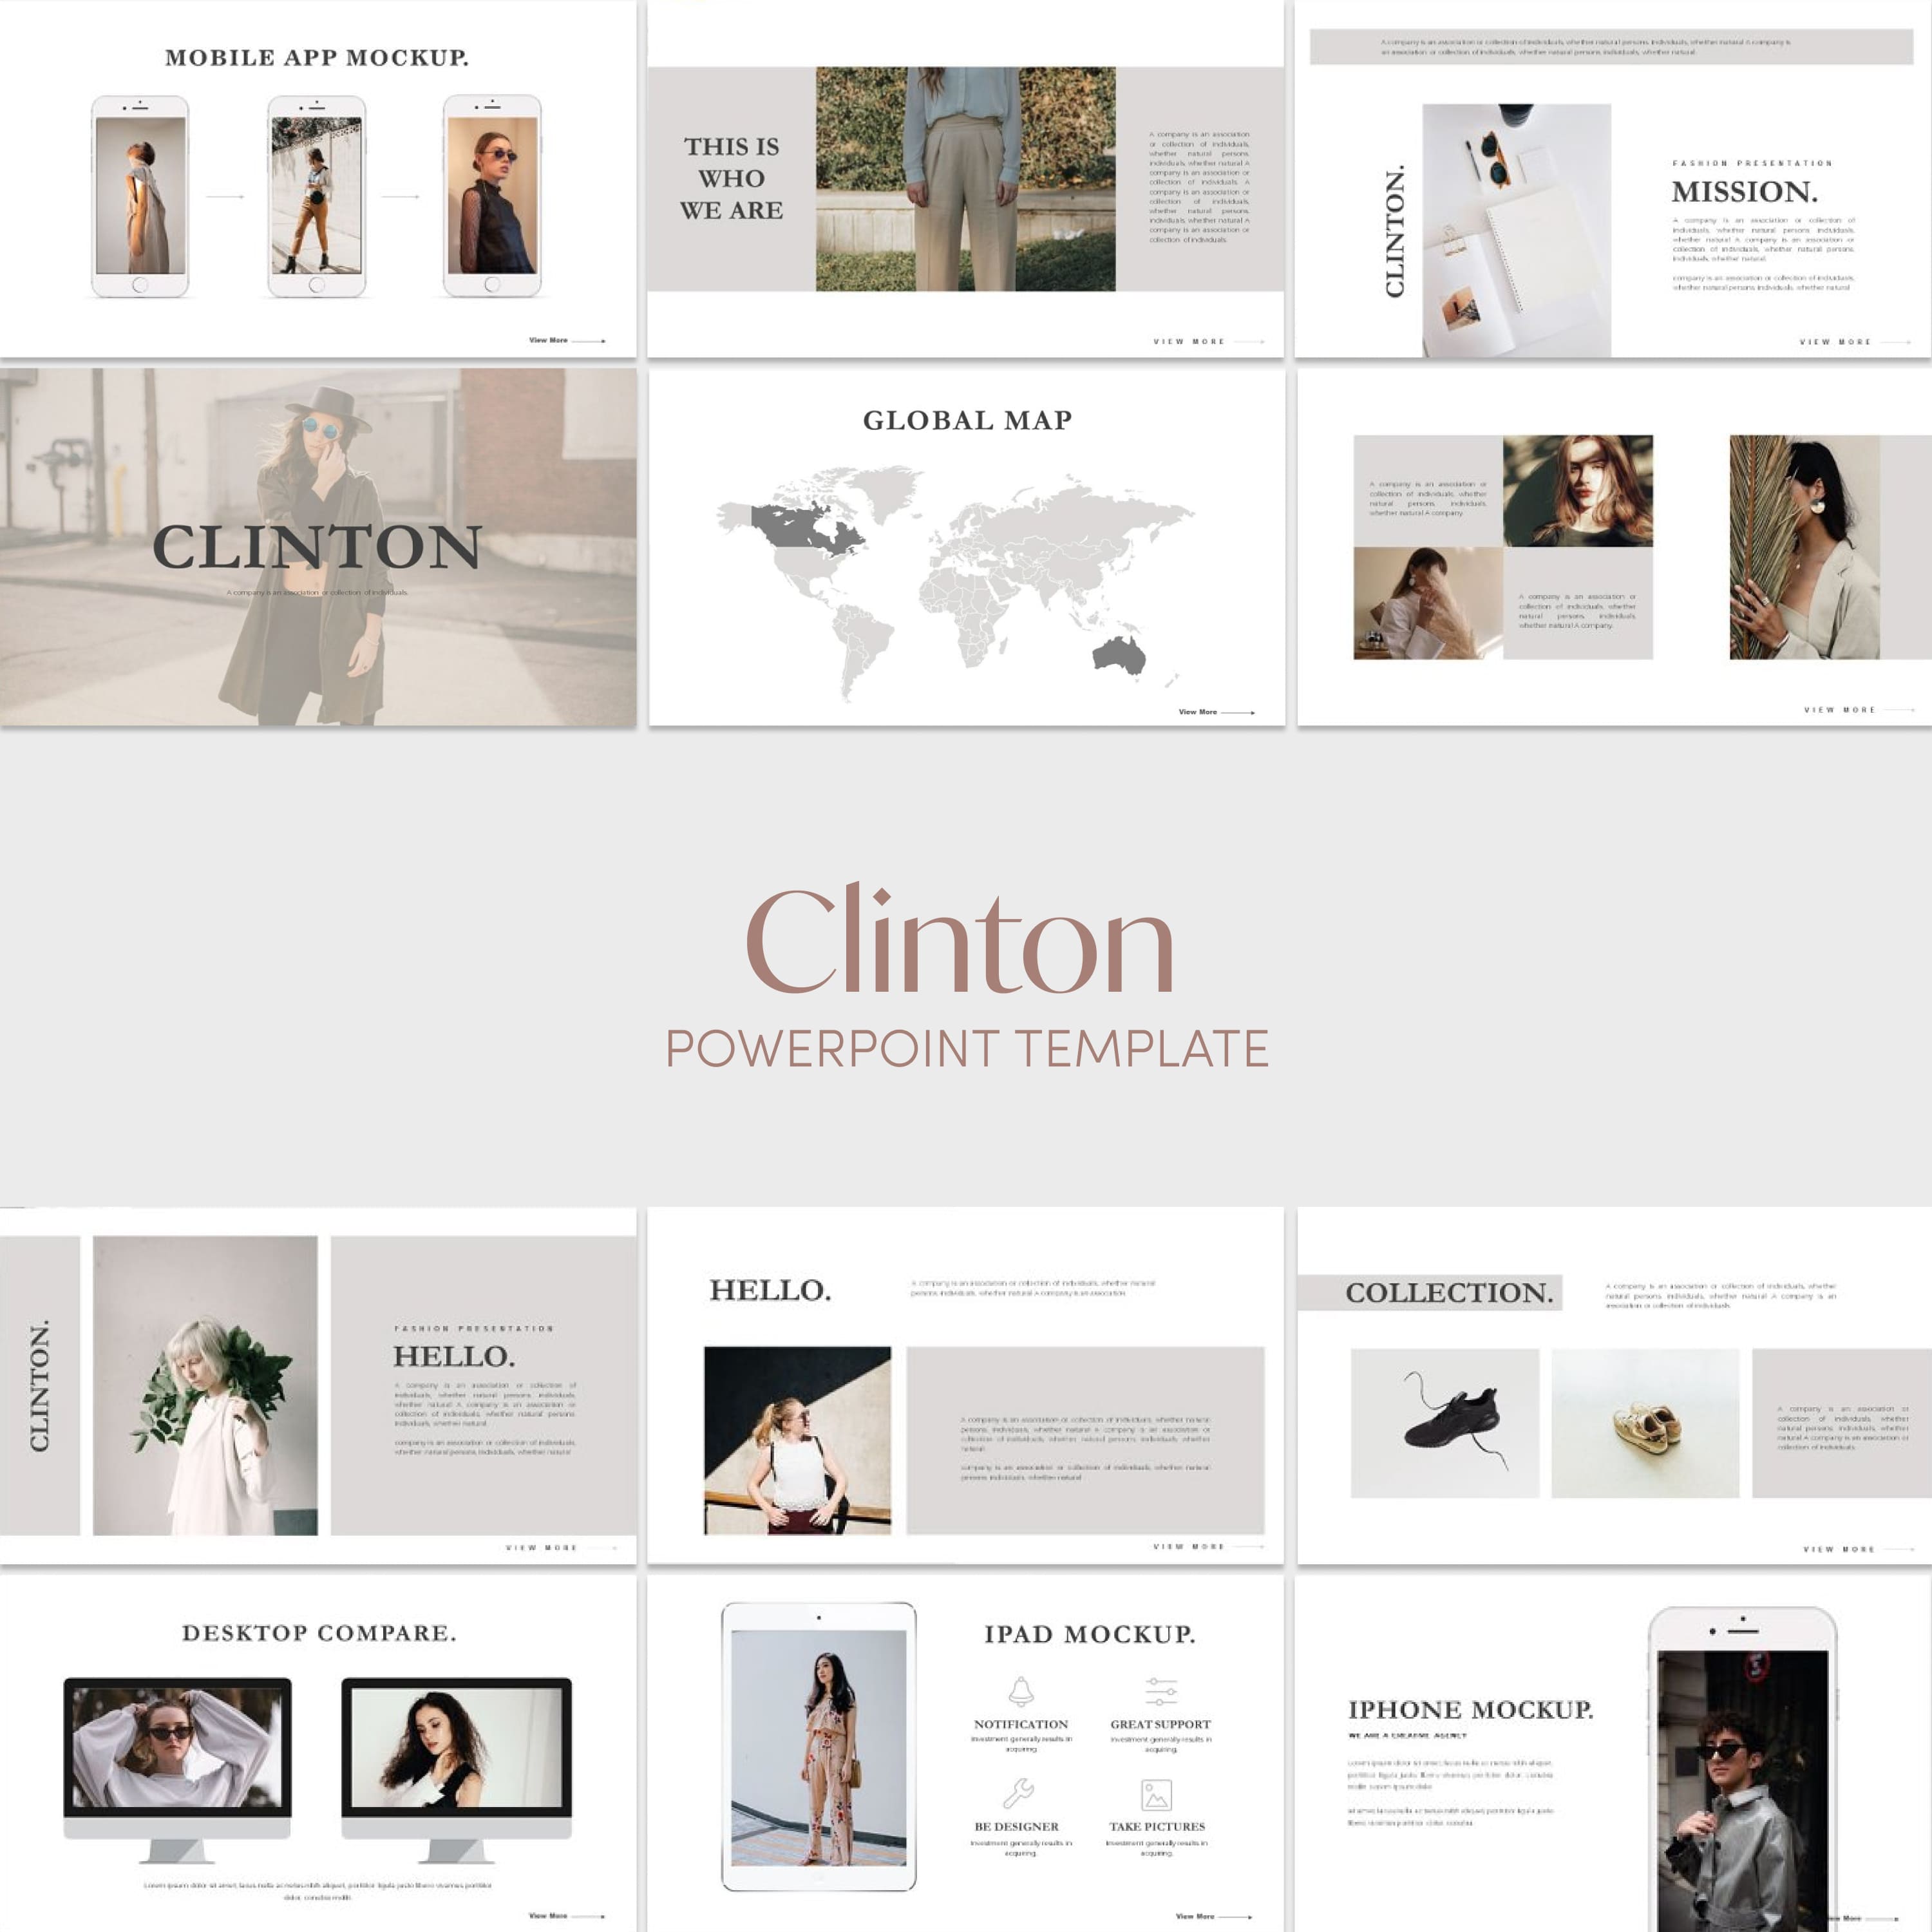 Clinton powerpoint template - main image preview.